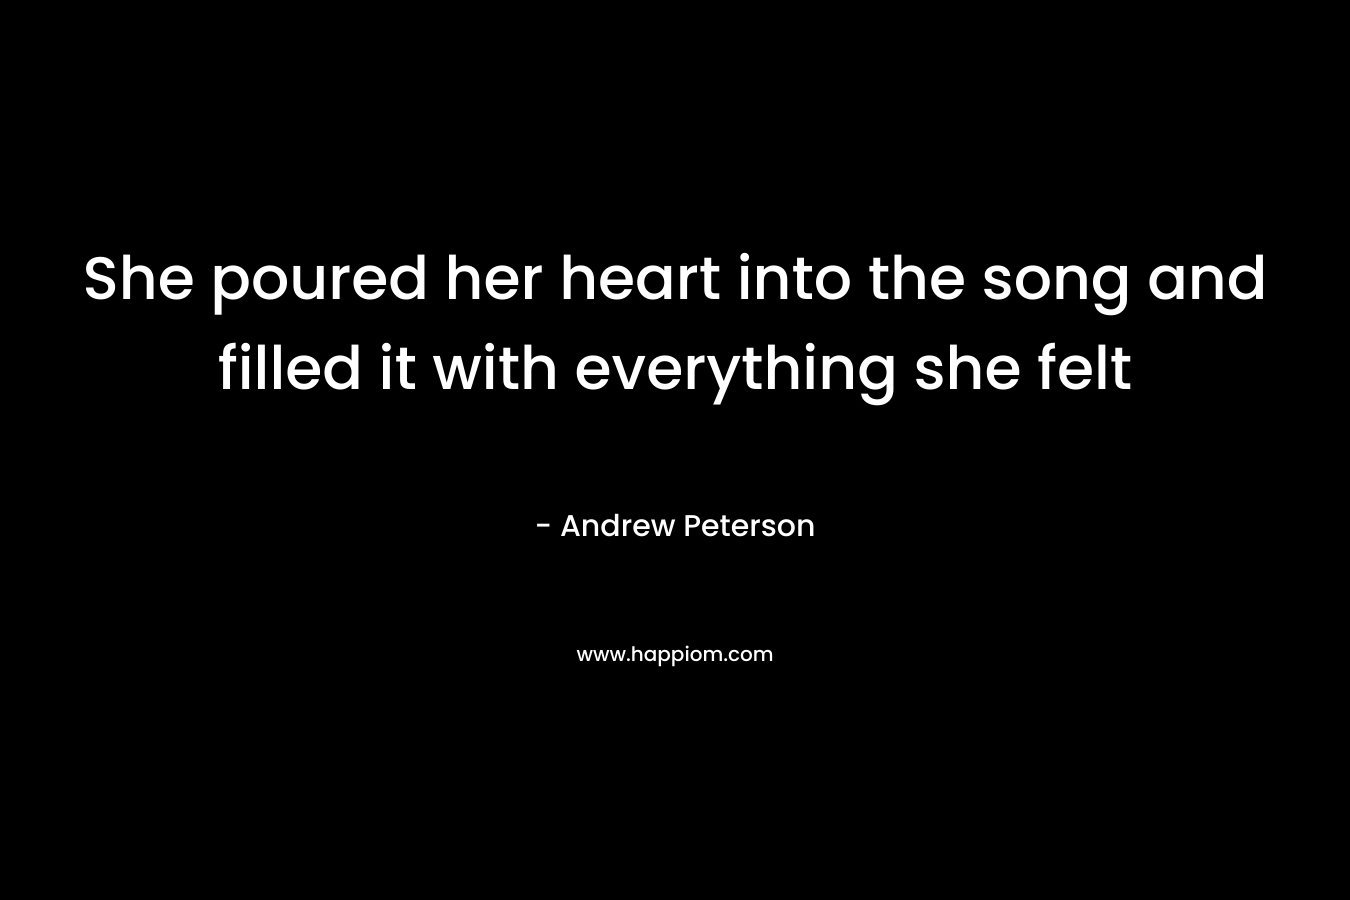 She poured her heart into the song and filled it with everything she felt